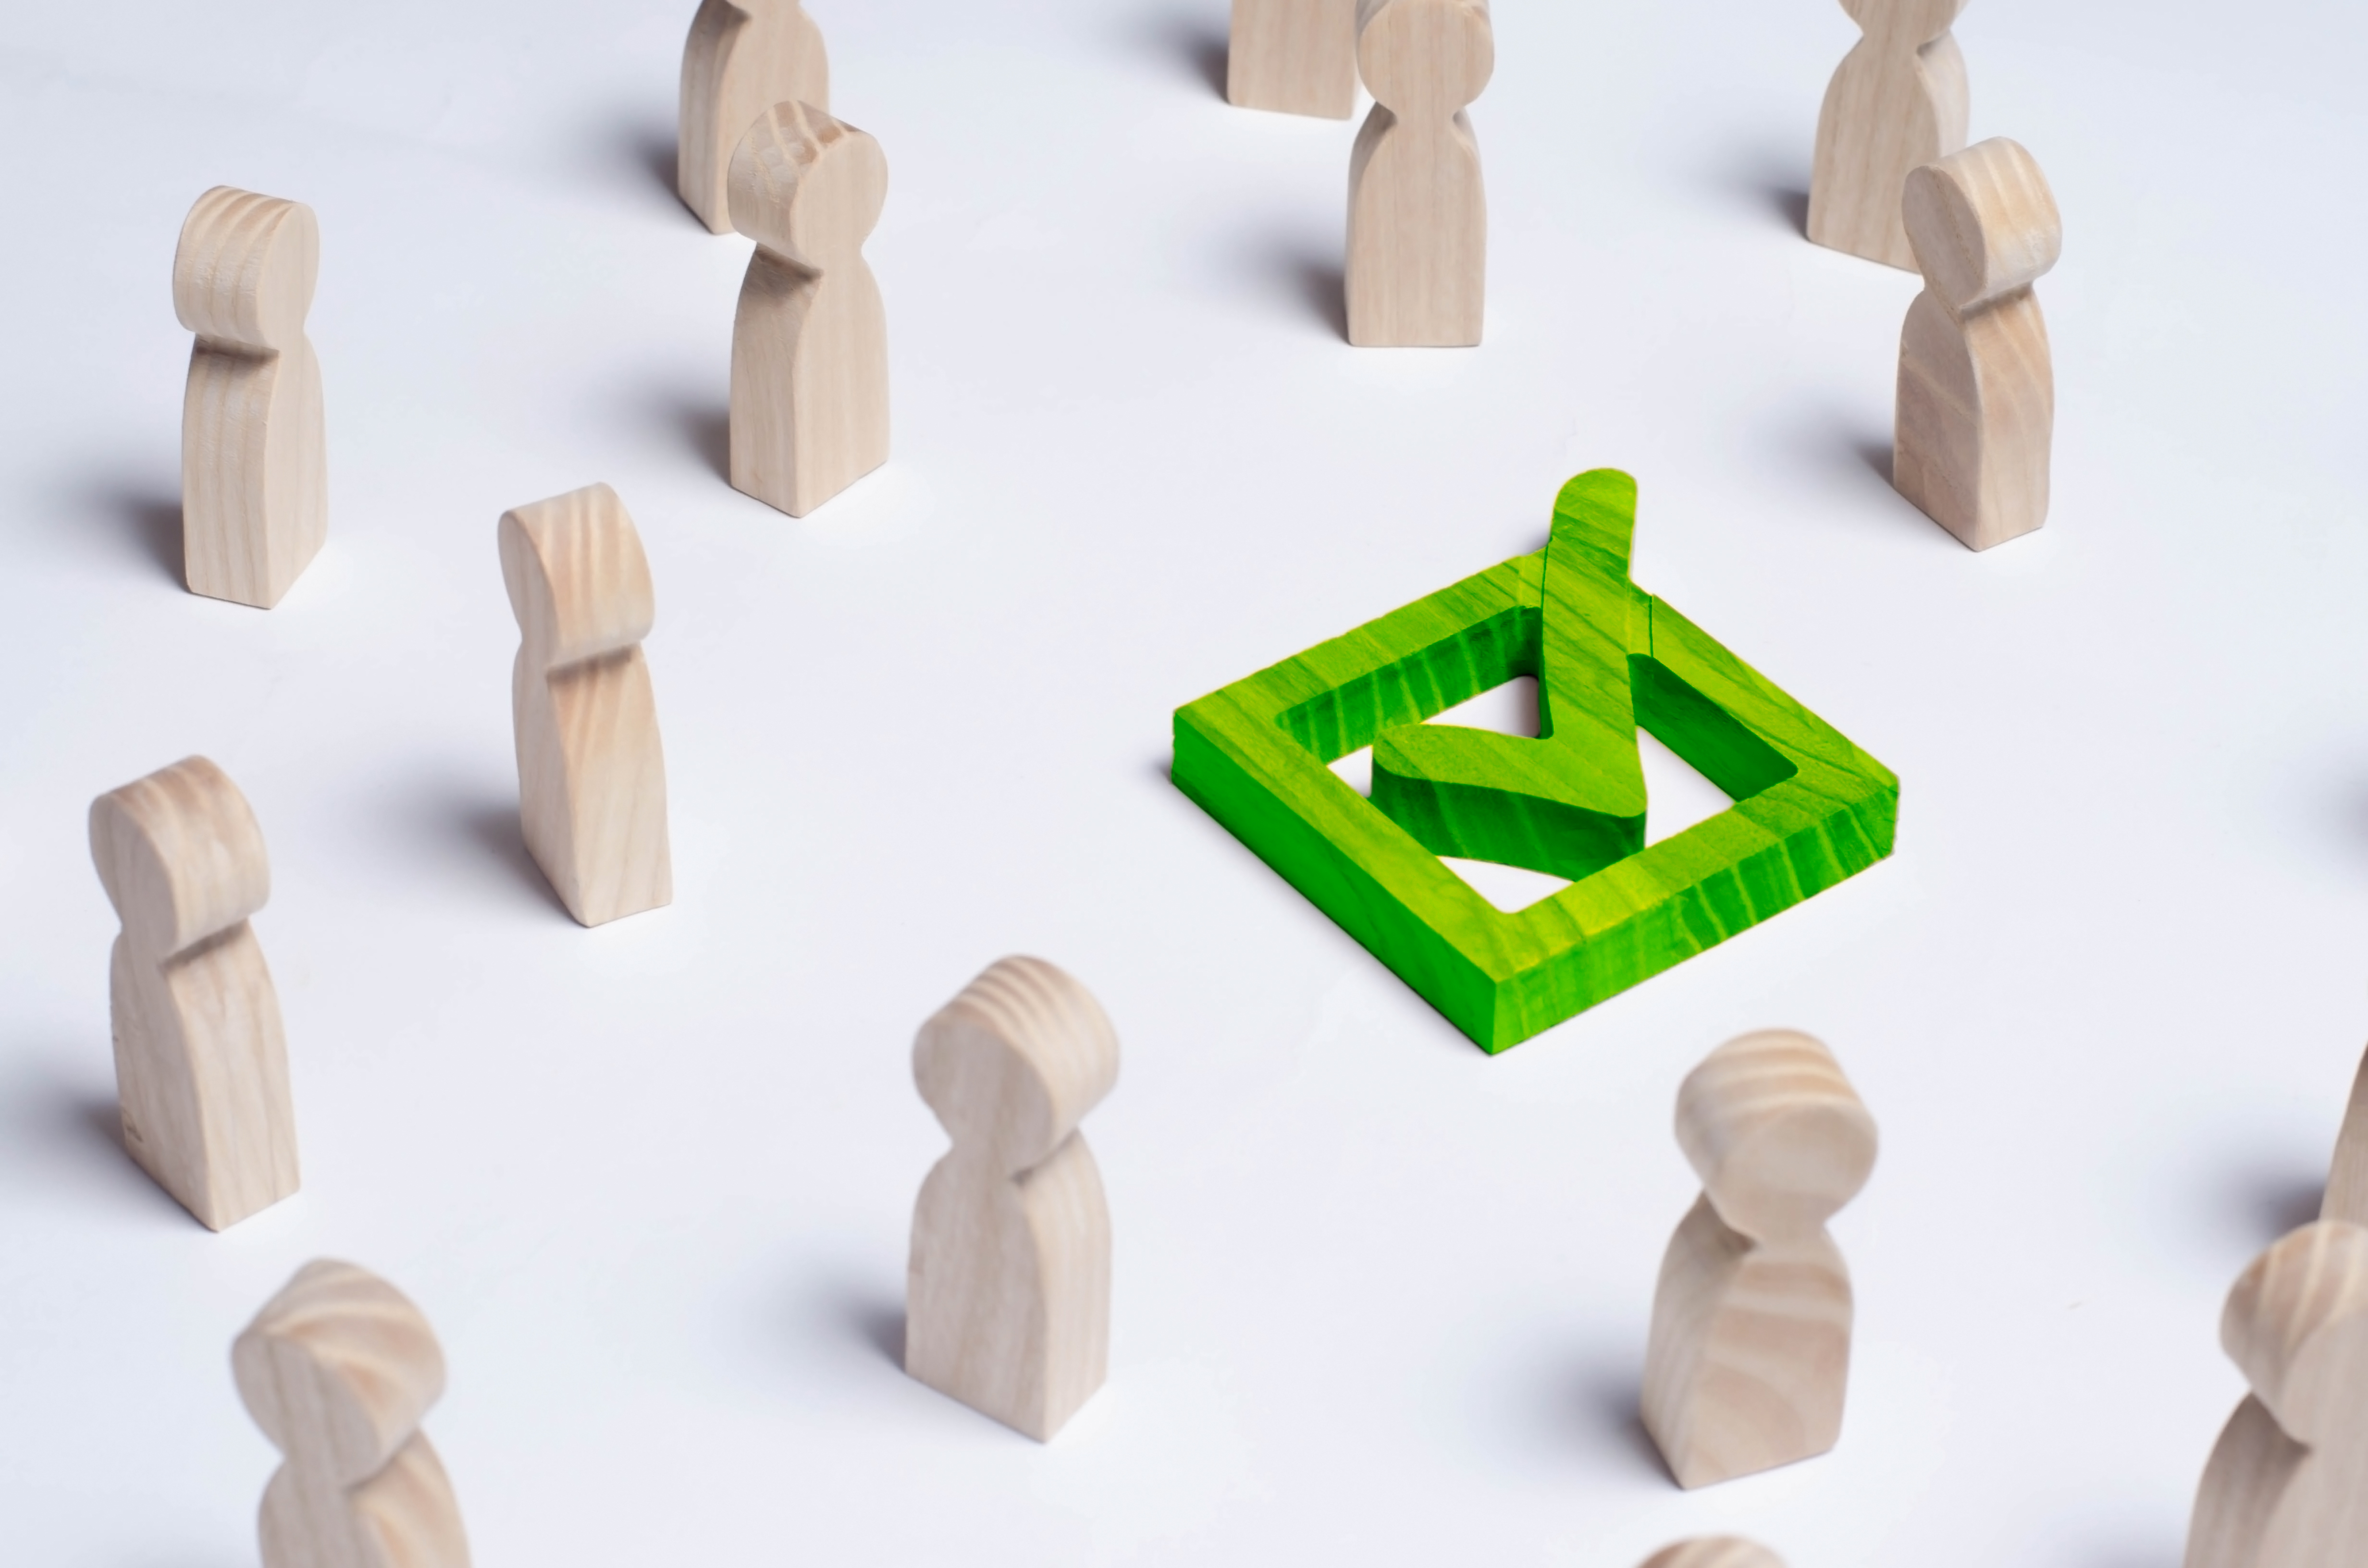 Picture of green tick in box surrounded by wooden people figures